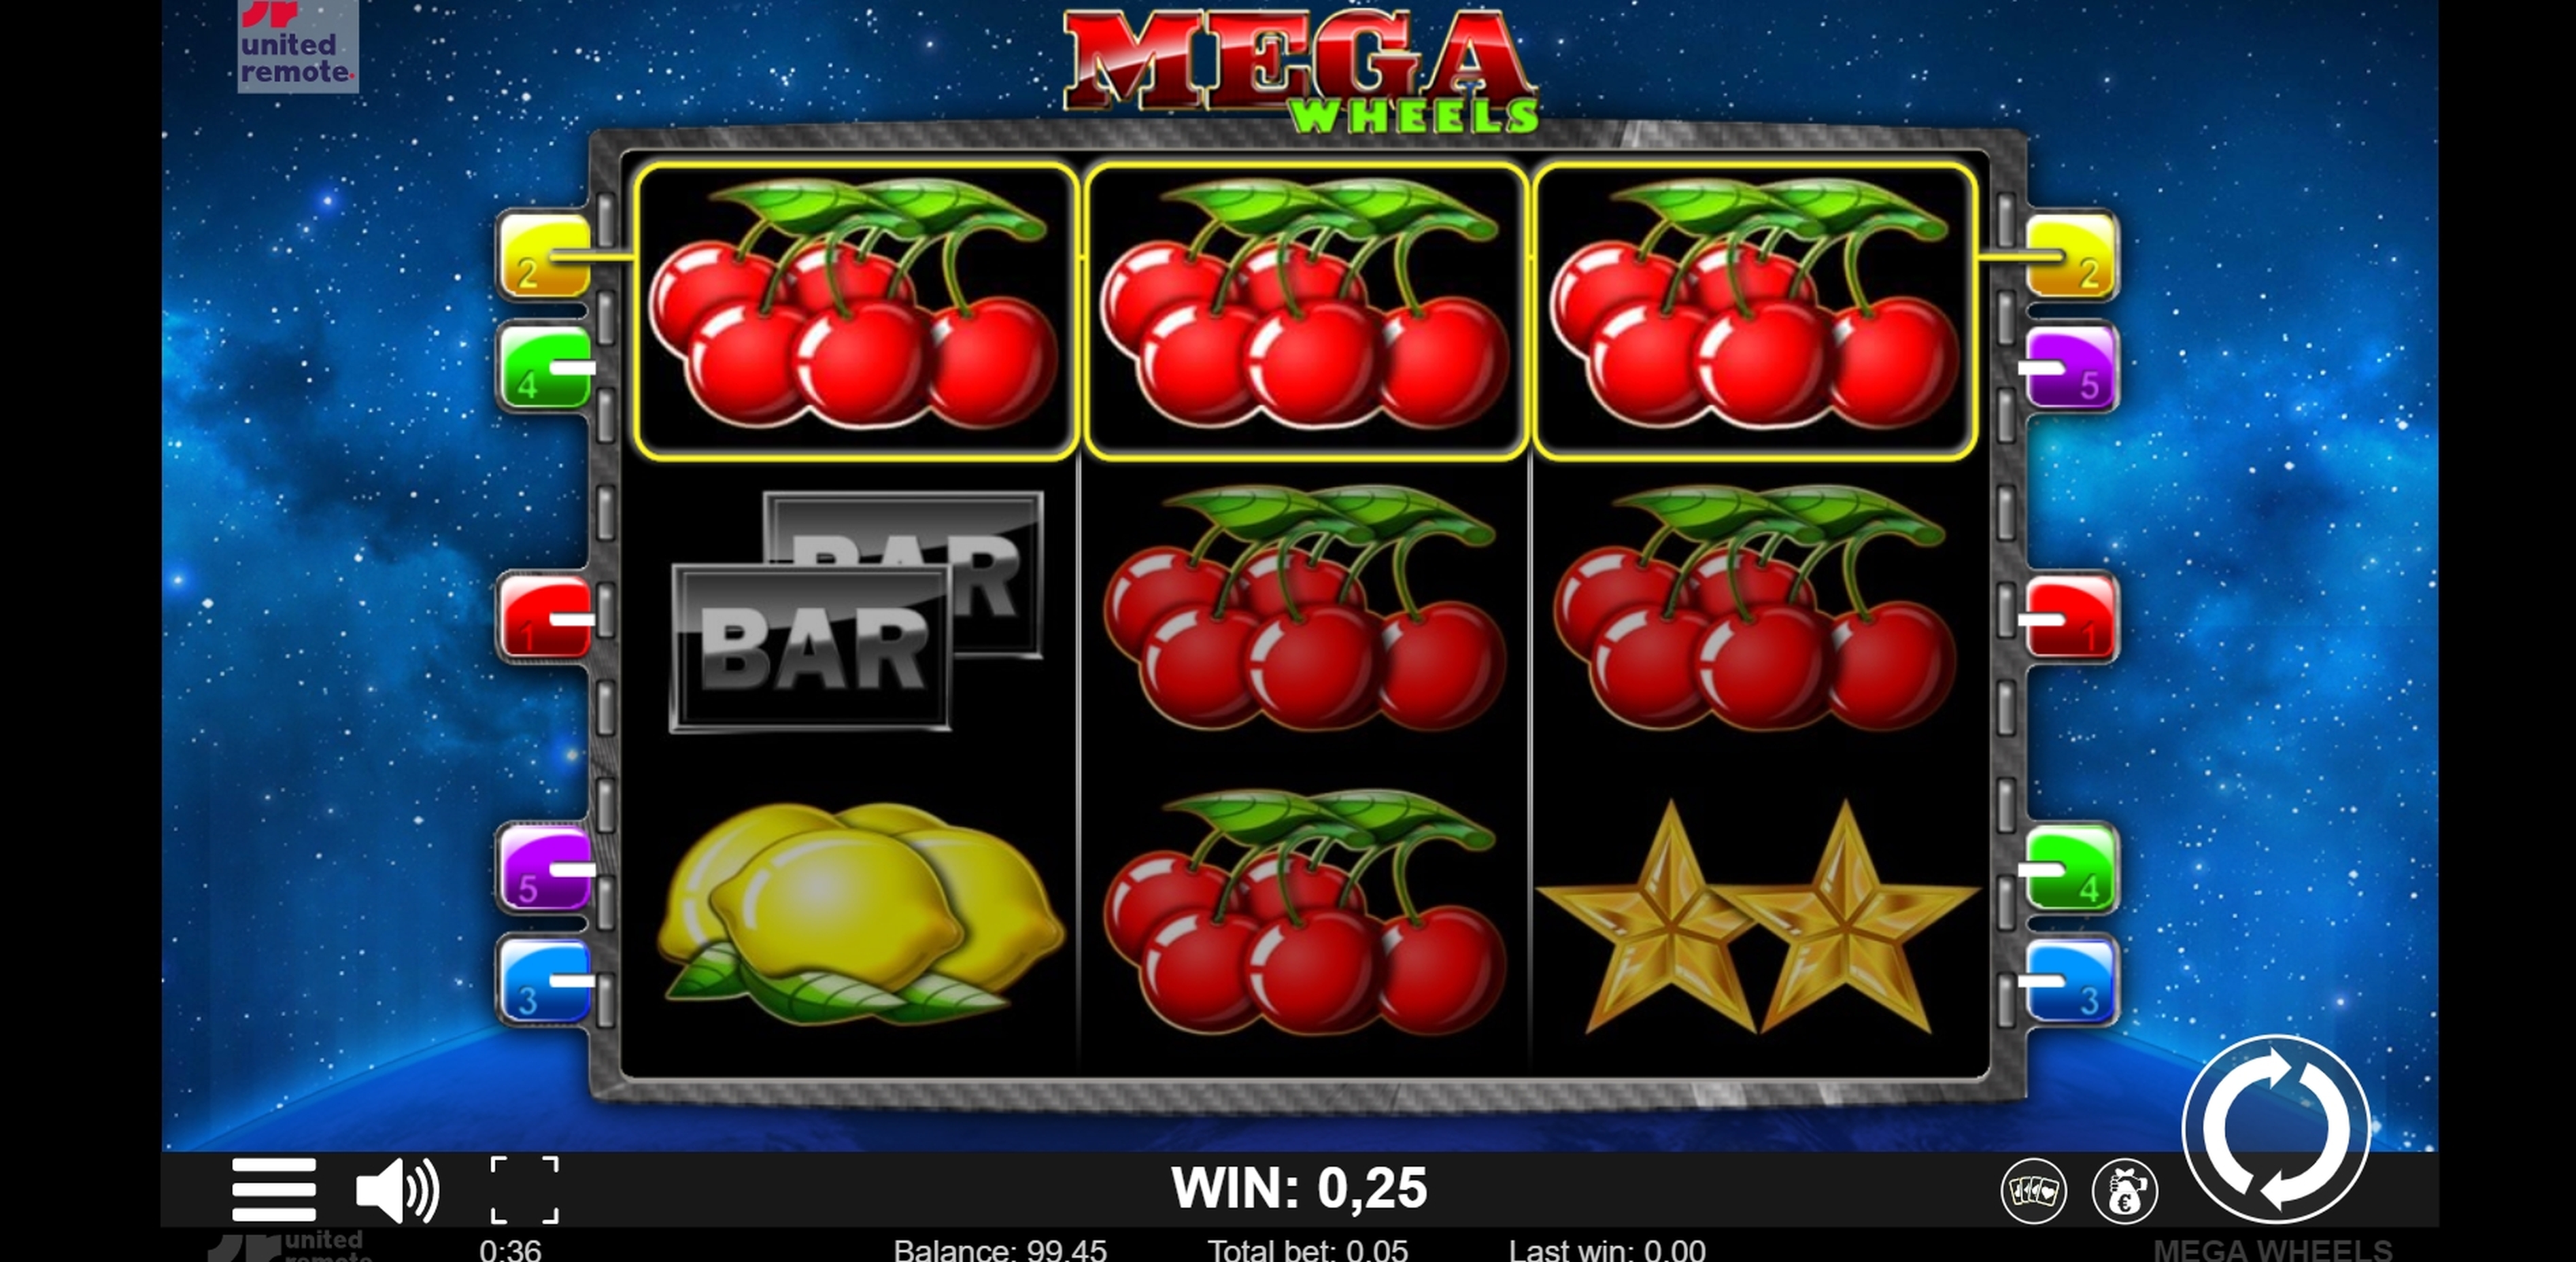 Win Money in Mega Wheels Free Slot Game by LionLine